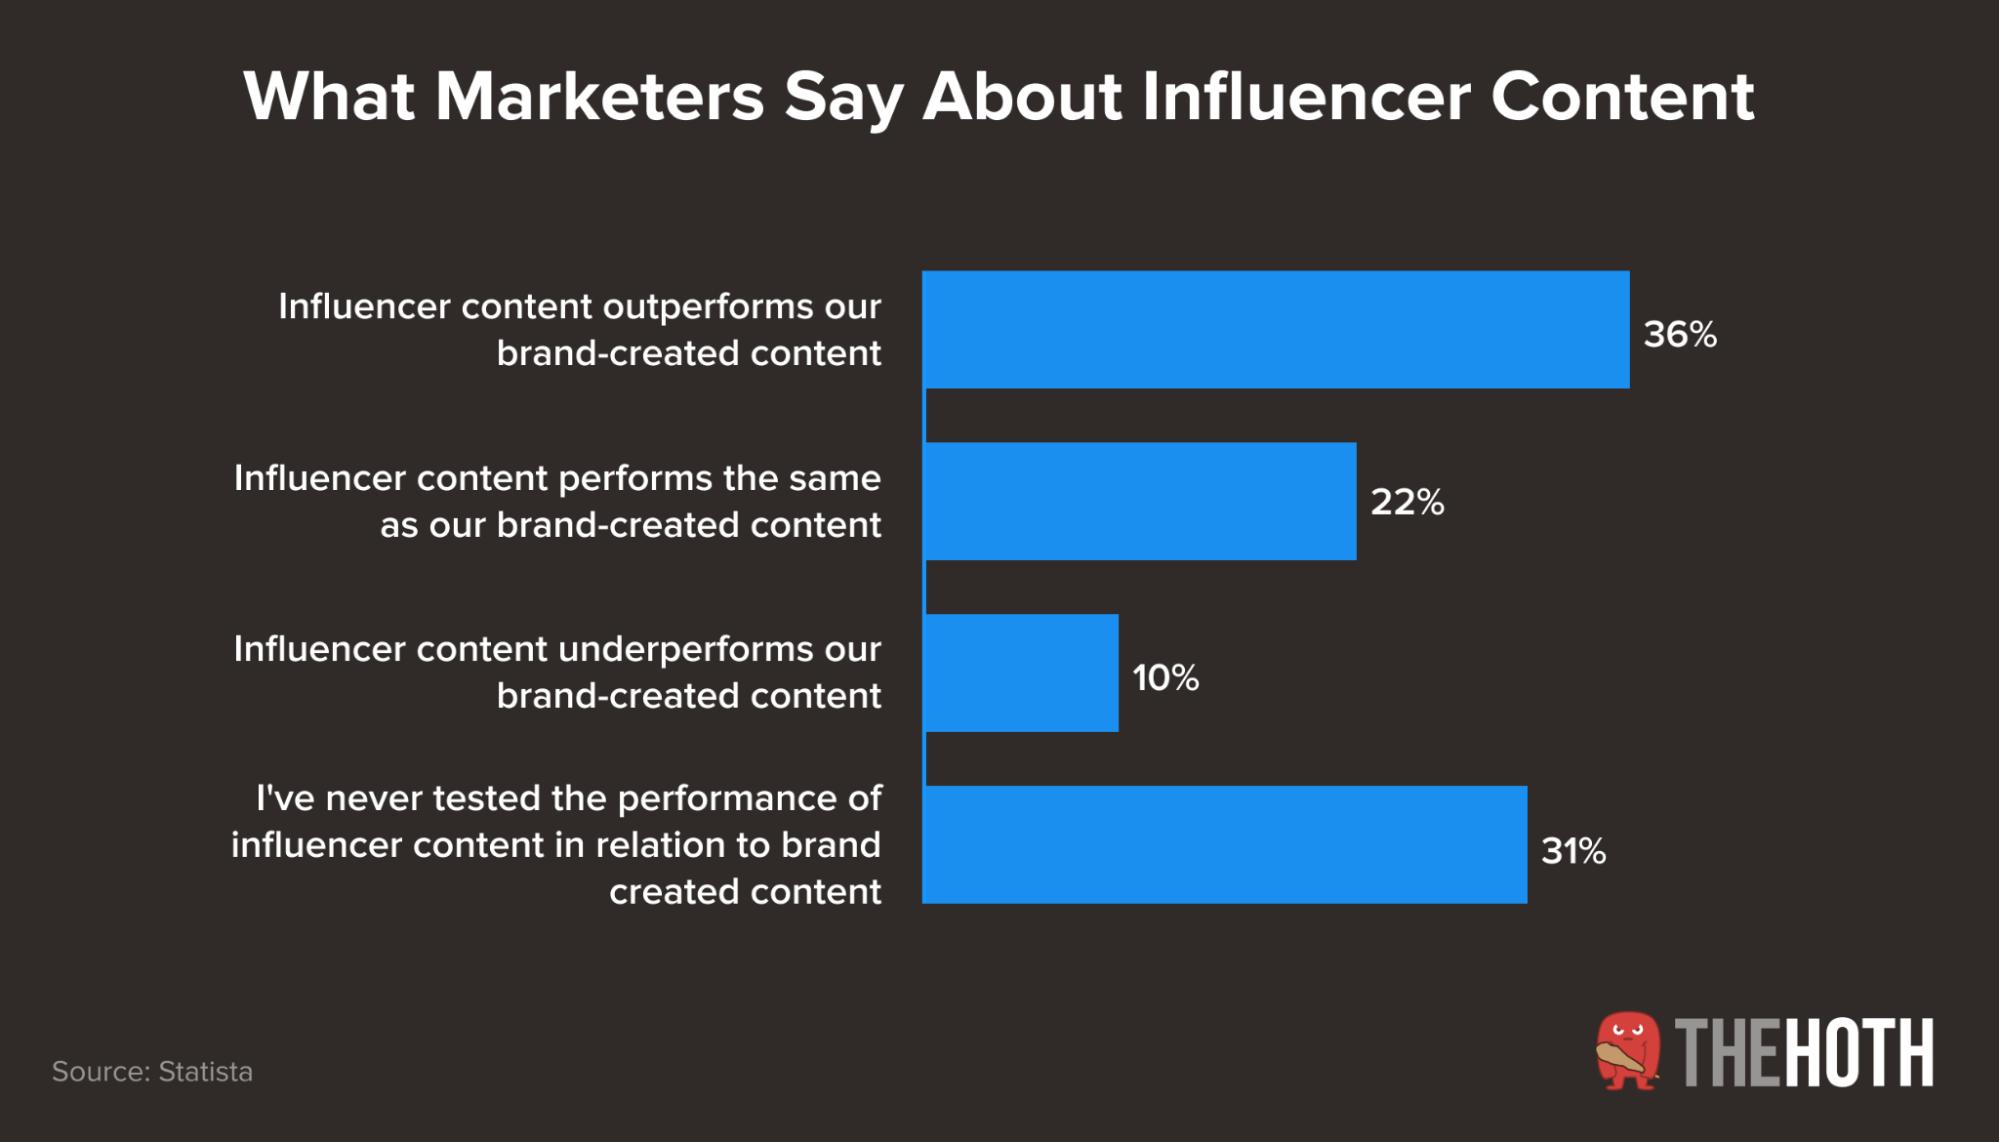 Influencer content outperforms brand content